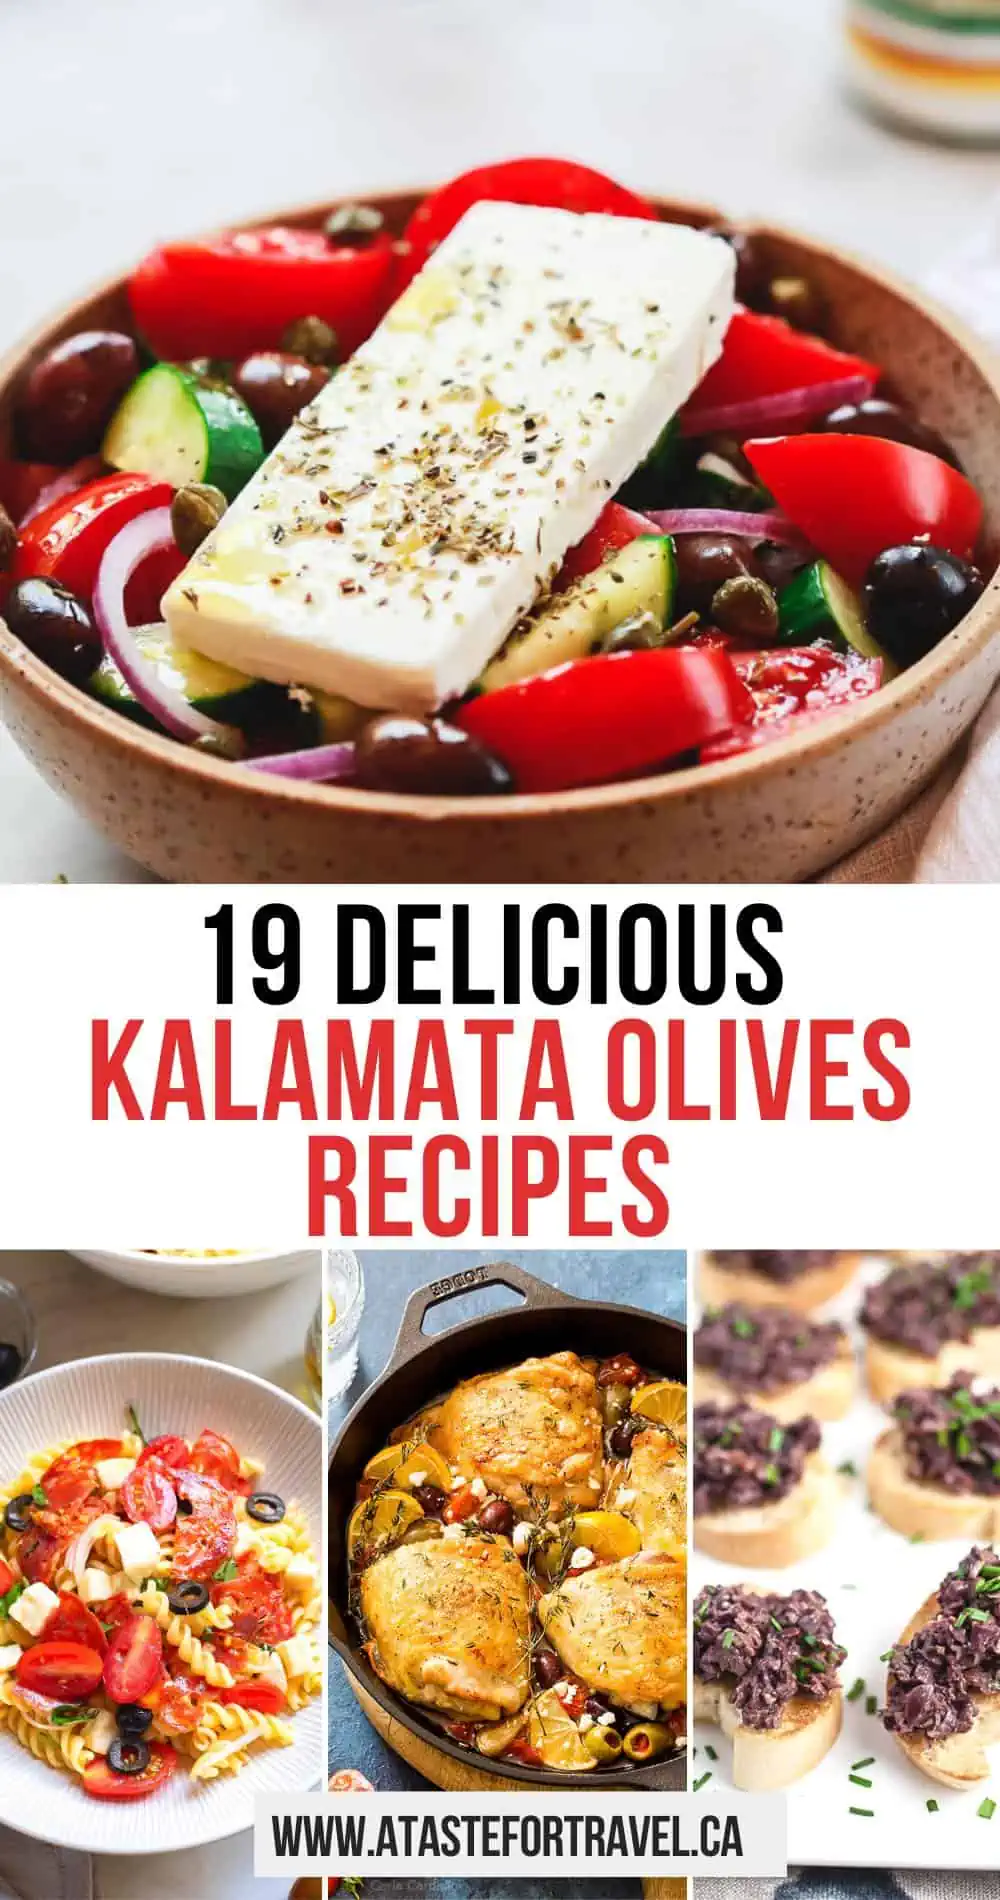 Collage of kalamata olives recipes for Pinterest.